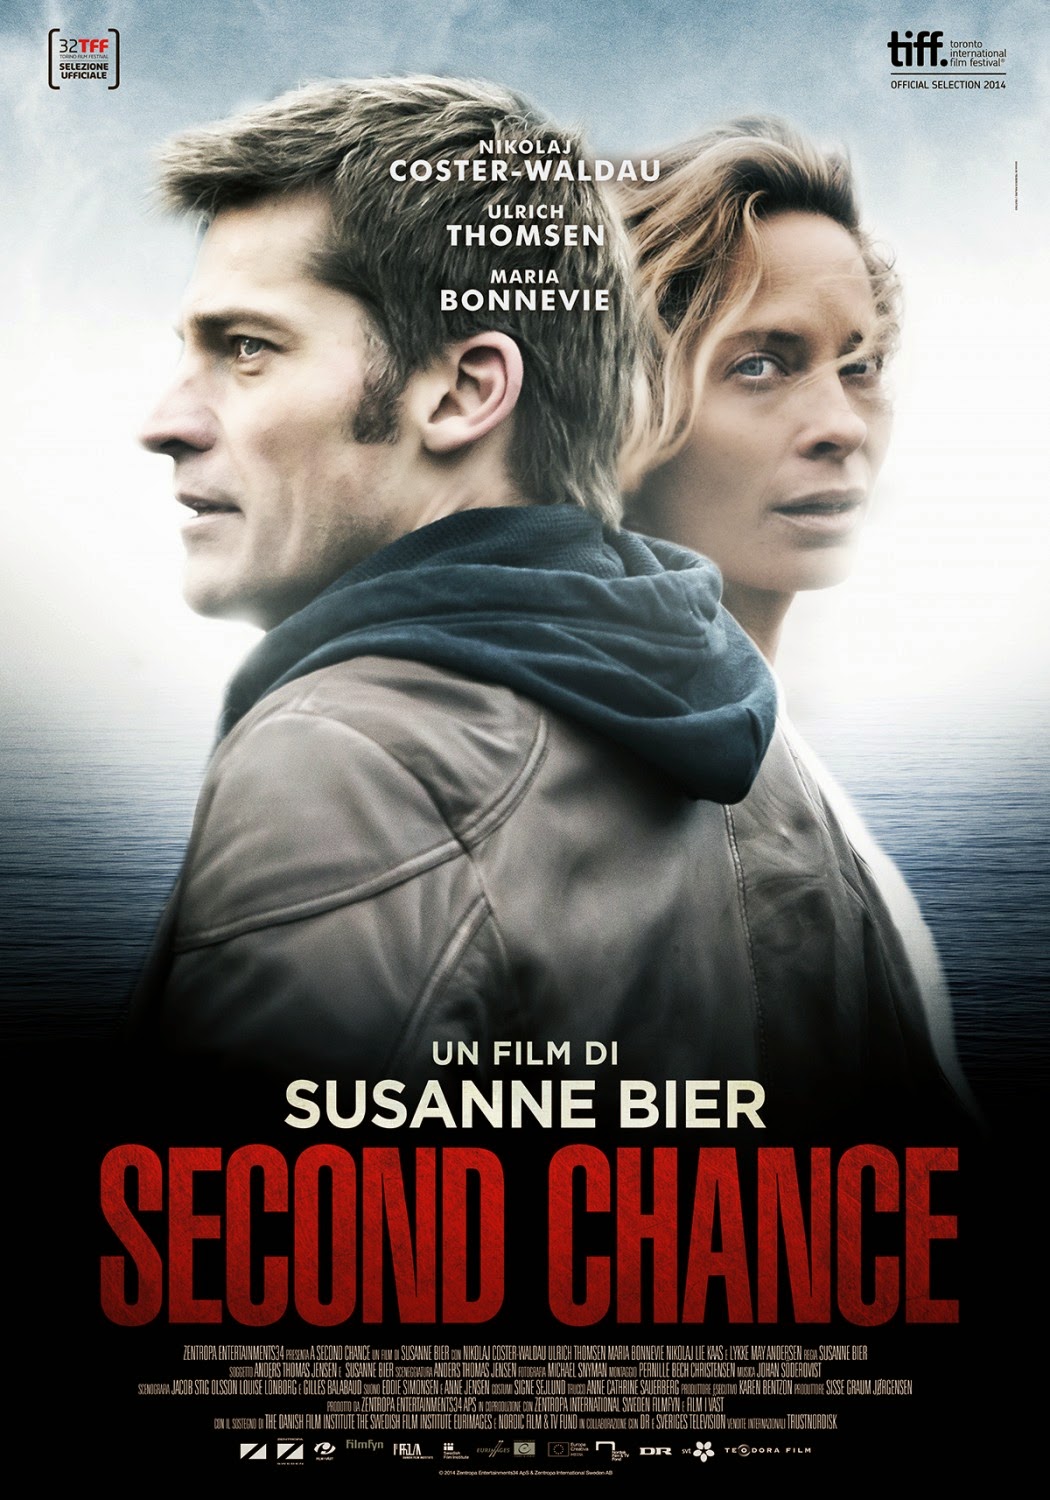 a-second-chance-2015-movie-poster-en-chance-til-teasers-trailers